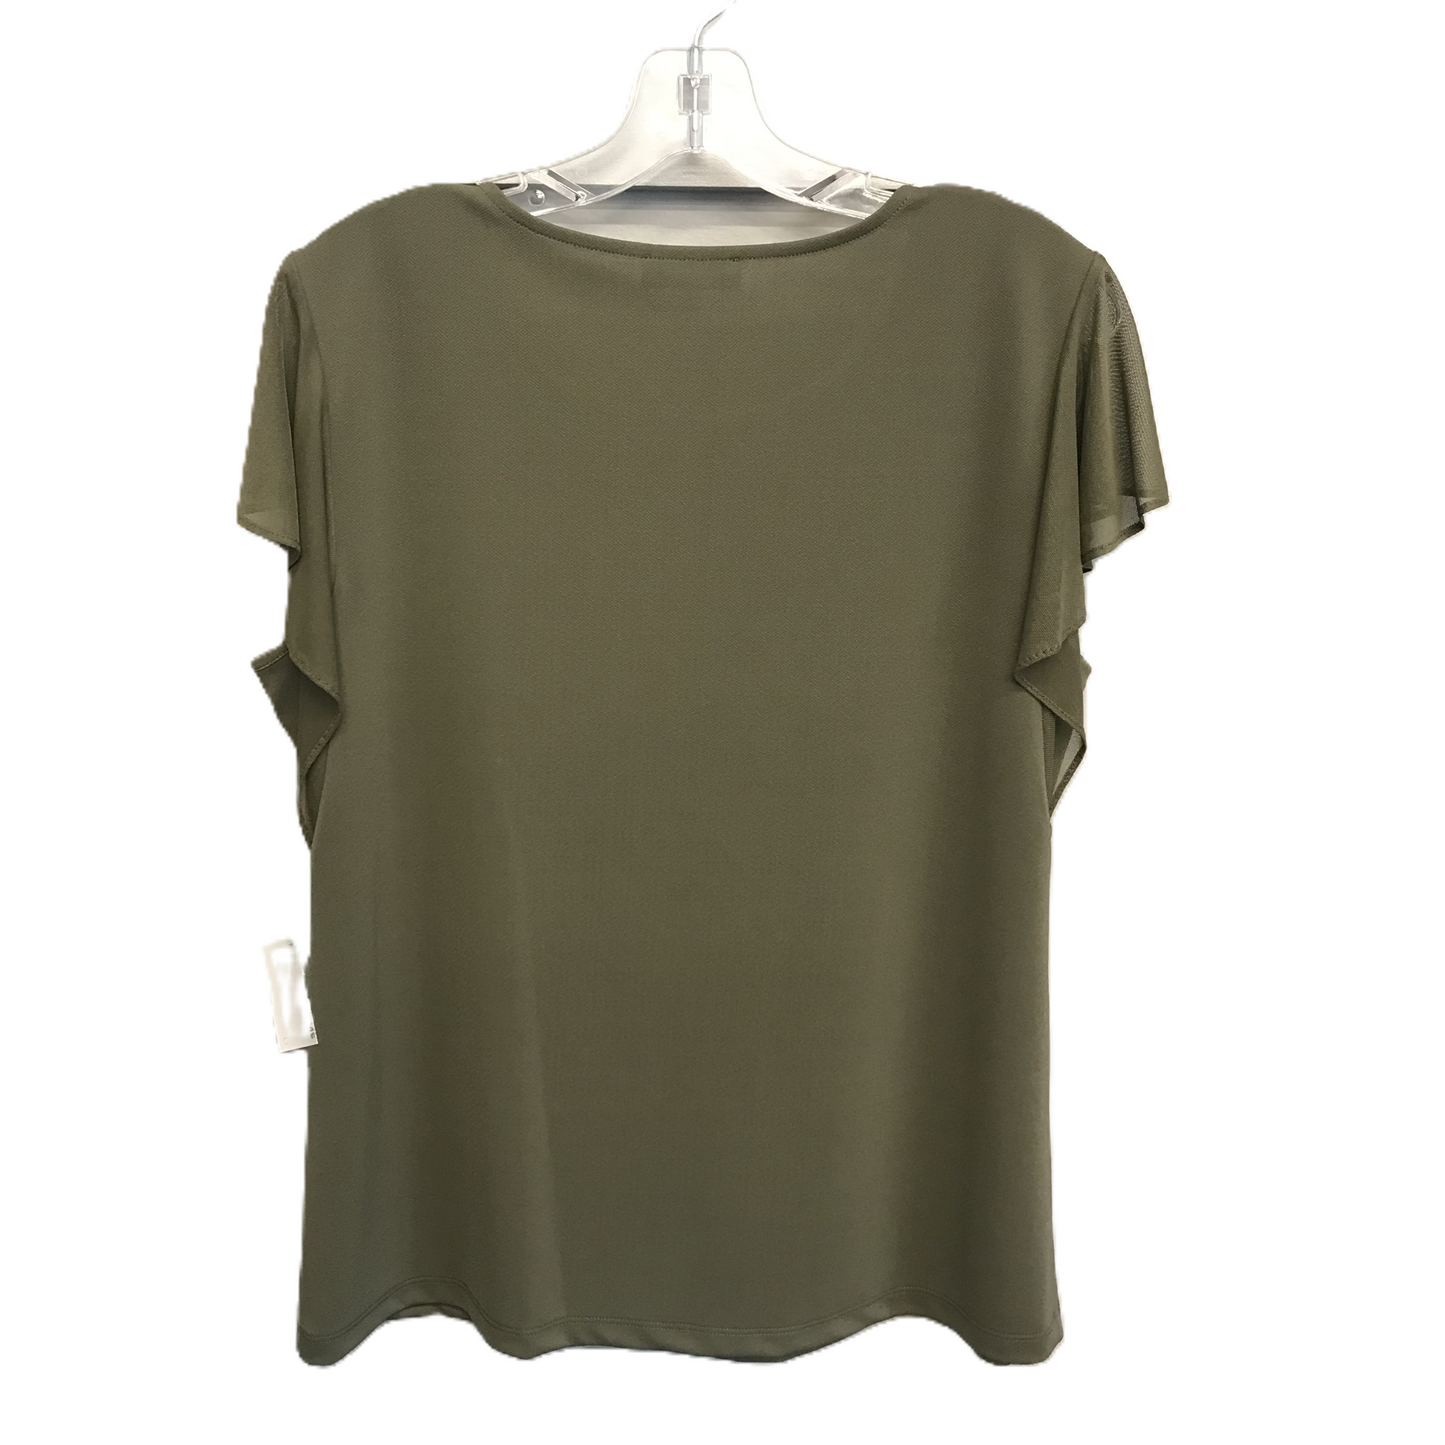 Green Top Short Sleeve By Calvin Klein, Size: M